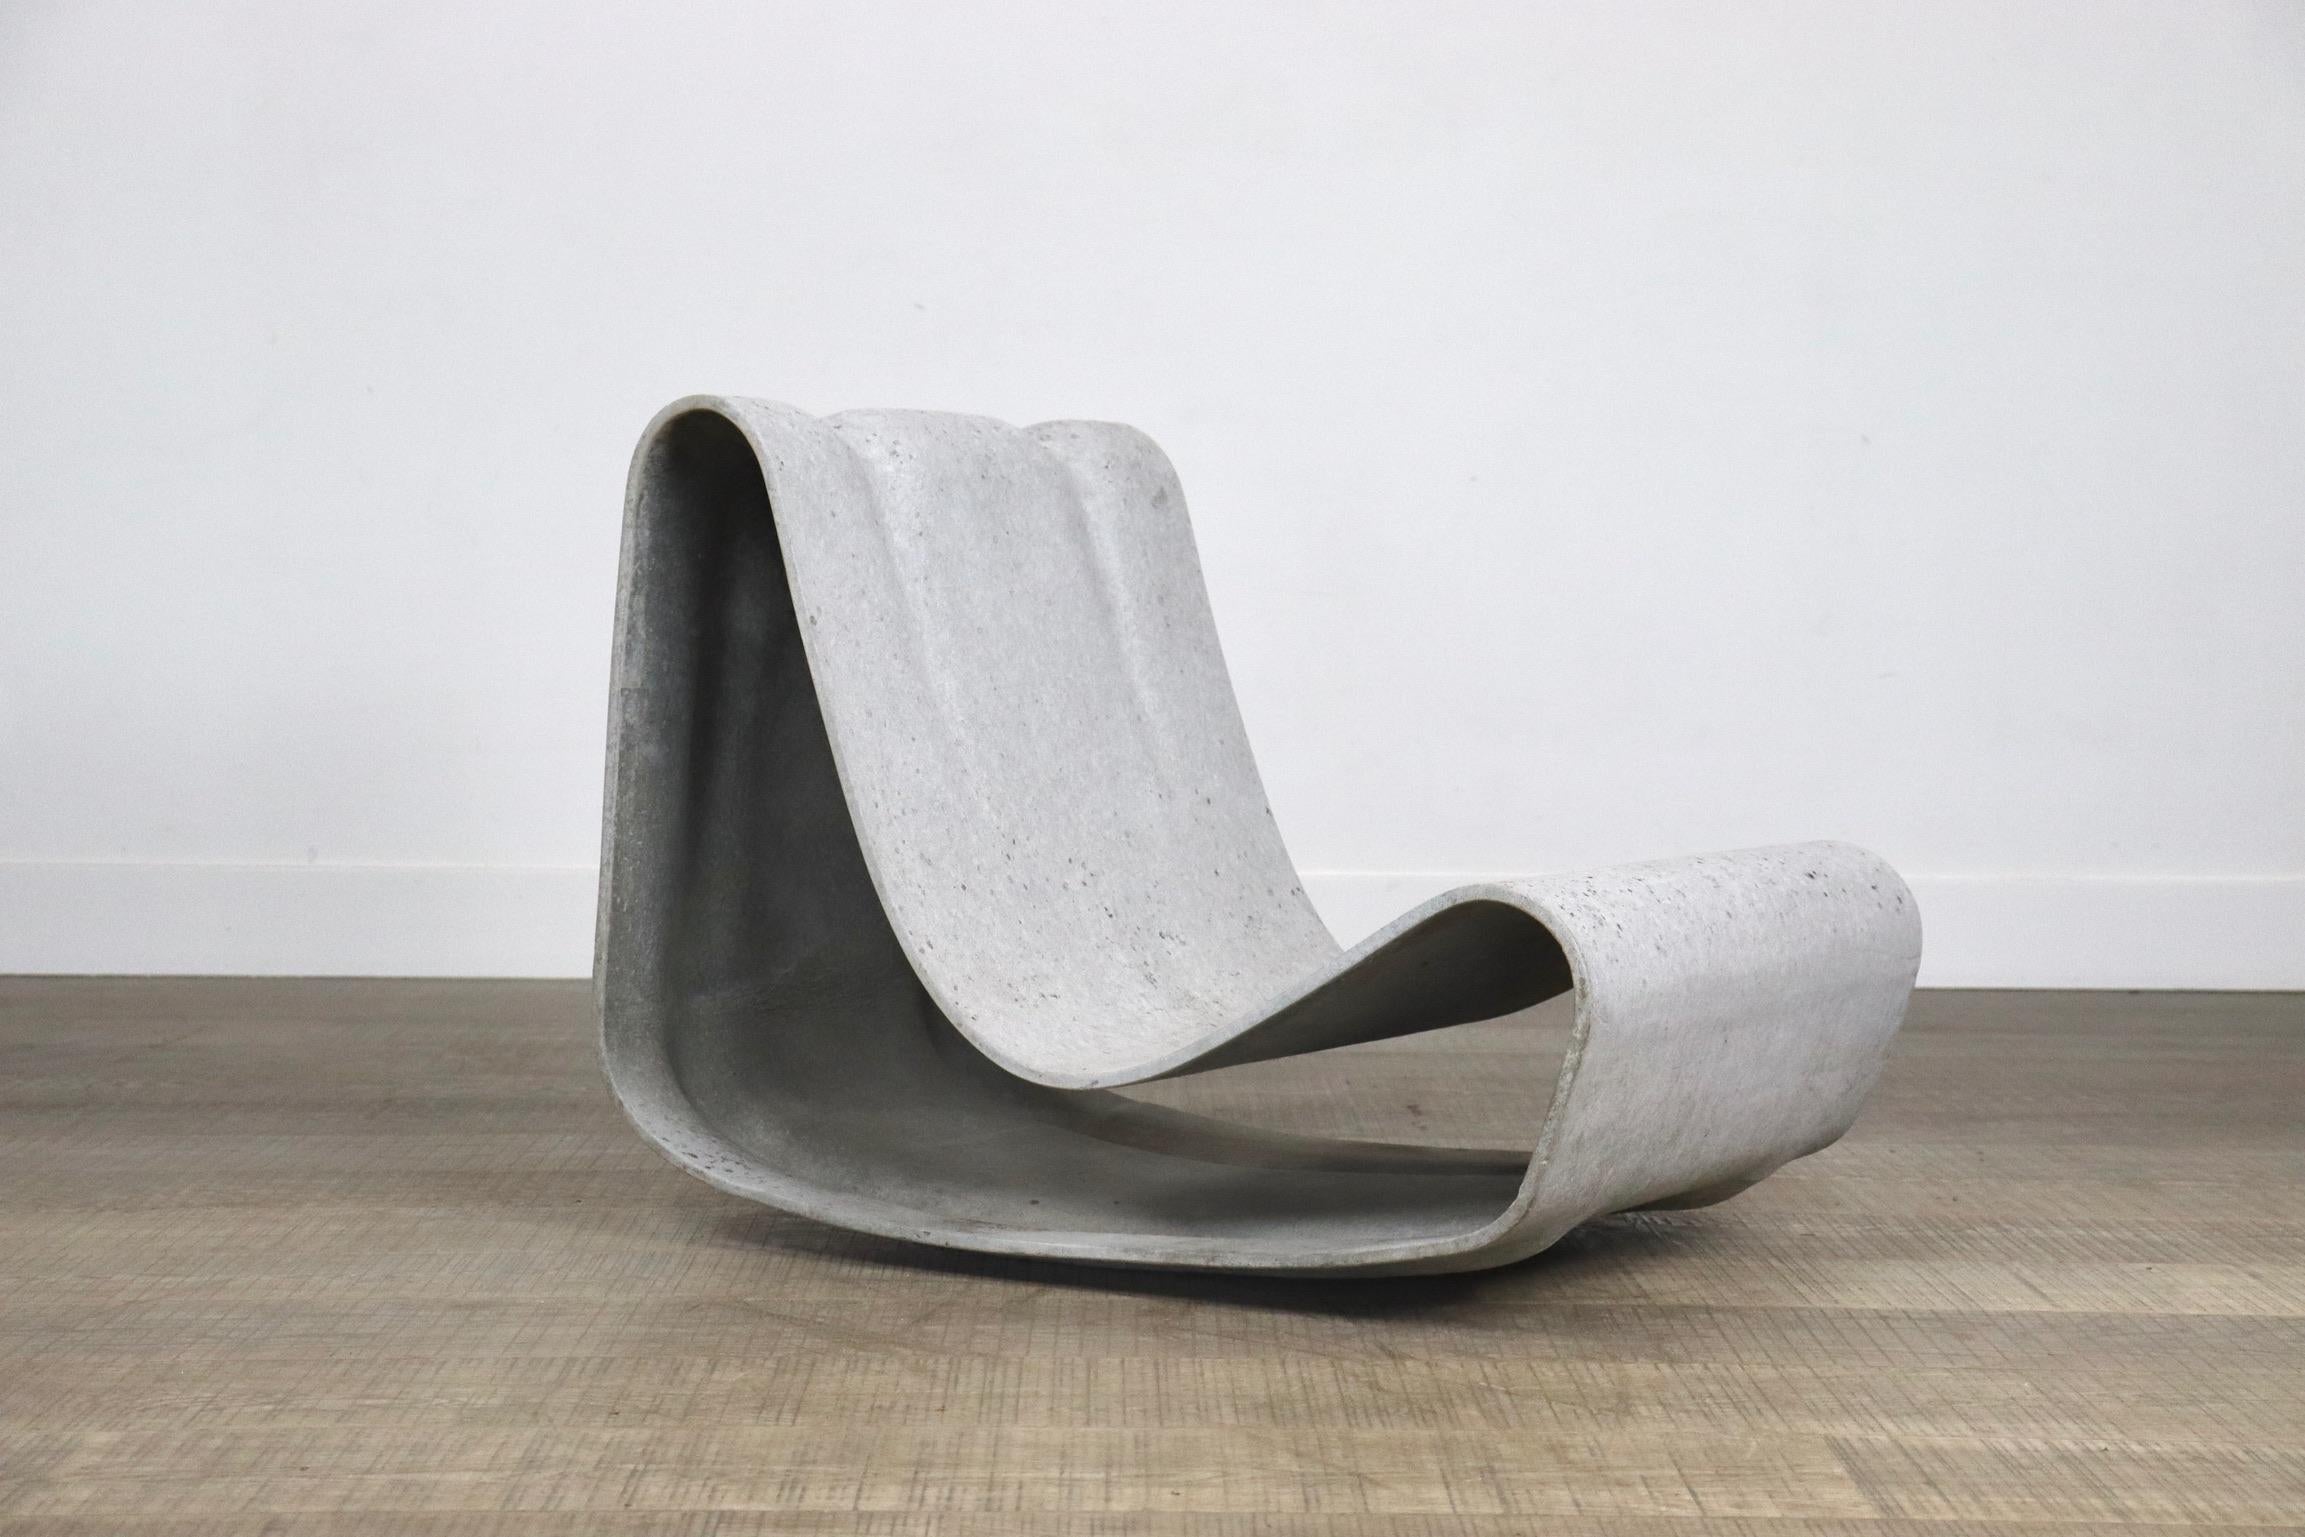 Incredible Loop chair by Willy Guhl for Eternit, 1990s. 
This iconic design by Willy Guhl was first designed in 1954 for Eternit. 
The fine lines and open structure makes it a beautiful piece to enjoy both indoors or outdoors. The material, fibre